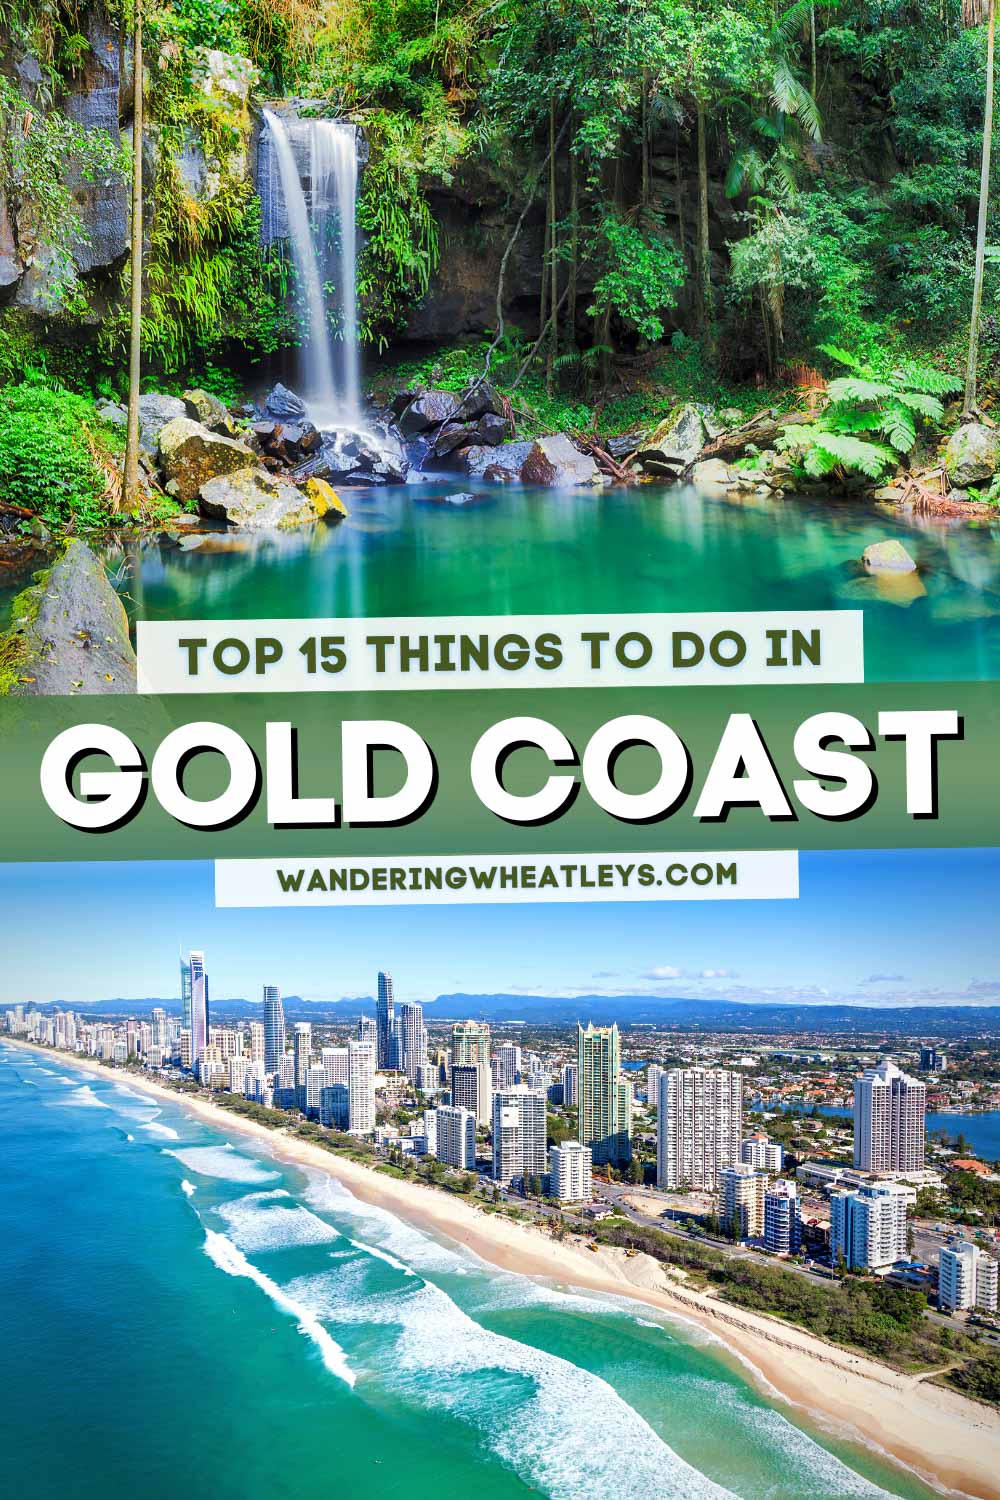 The Best Things to do in Gold Coast